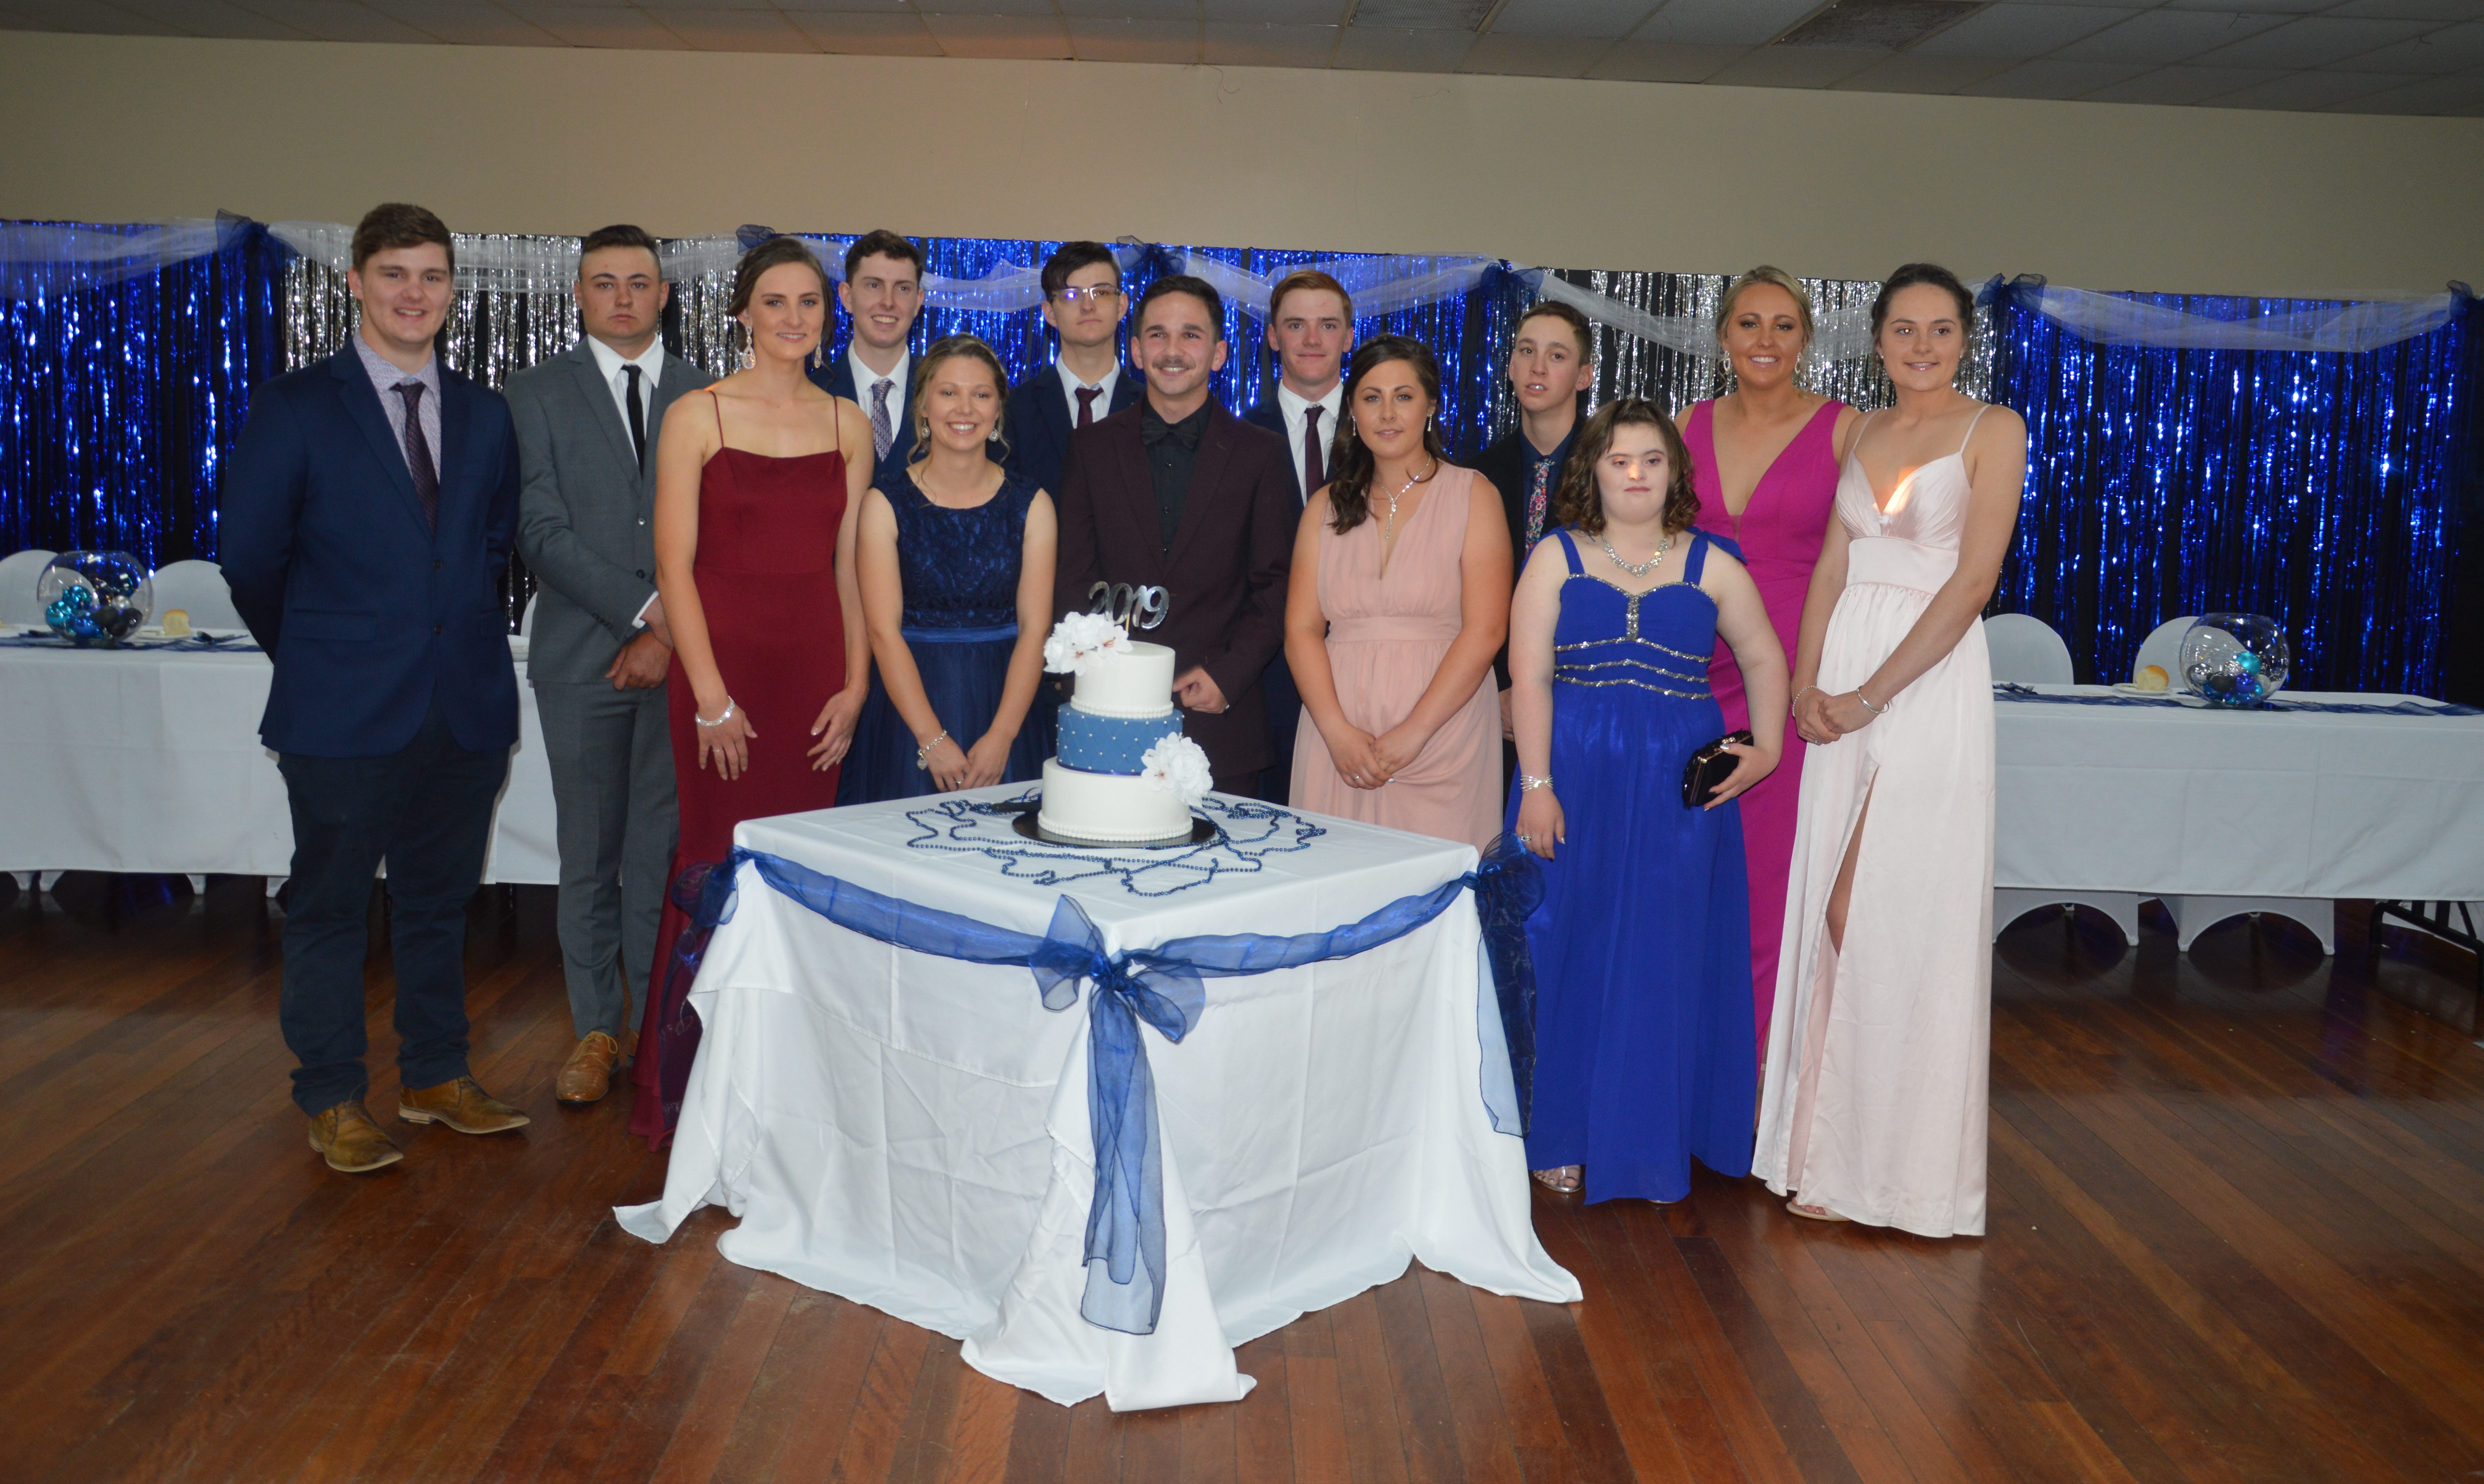 Wee Waa High School’s class of 2019 at their year 12 high school formal, Saturday November 16. Pictured, Charles Young, TJ Wright, Noah Platt, Rhys Pffer, Harry Pattison, Sam Galagher, Caitlyn Galagher and Cait Downes, front, Sarah Stanfield, Emily Shearin, Lachlan Trindall, N’Kayla Gaydon and Elizabeth Horne.